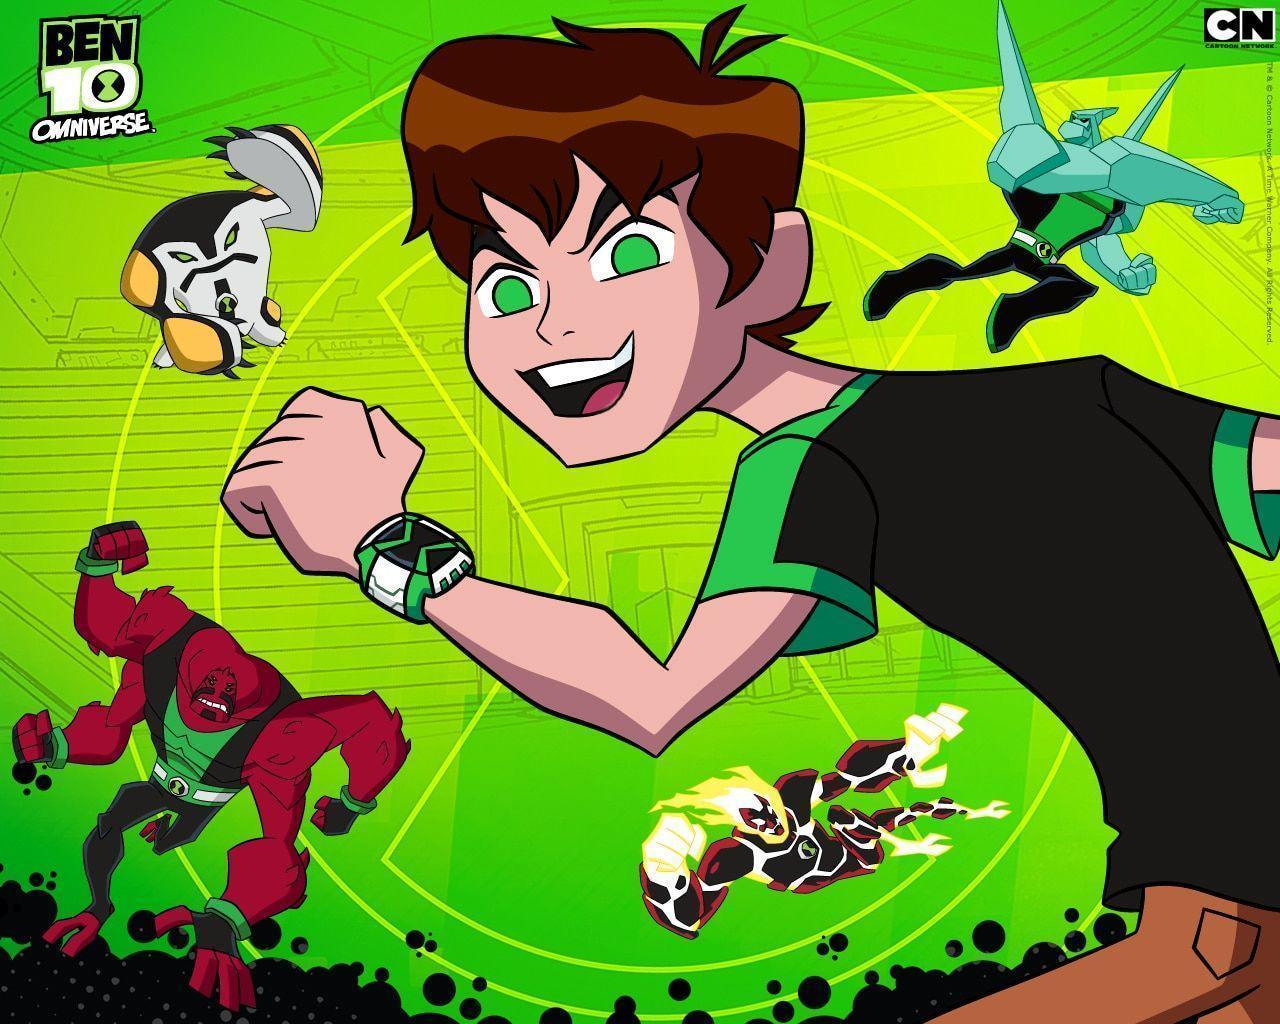 Ben 10: Omniverse. Download Free Picture and Wallpaper